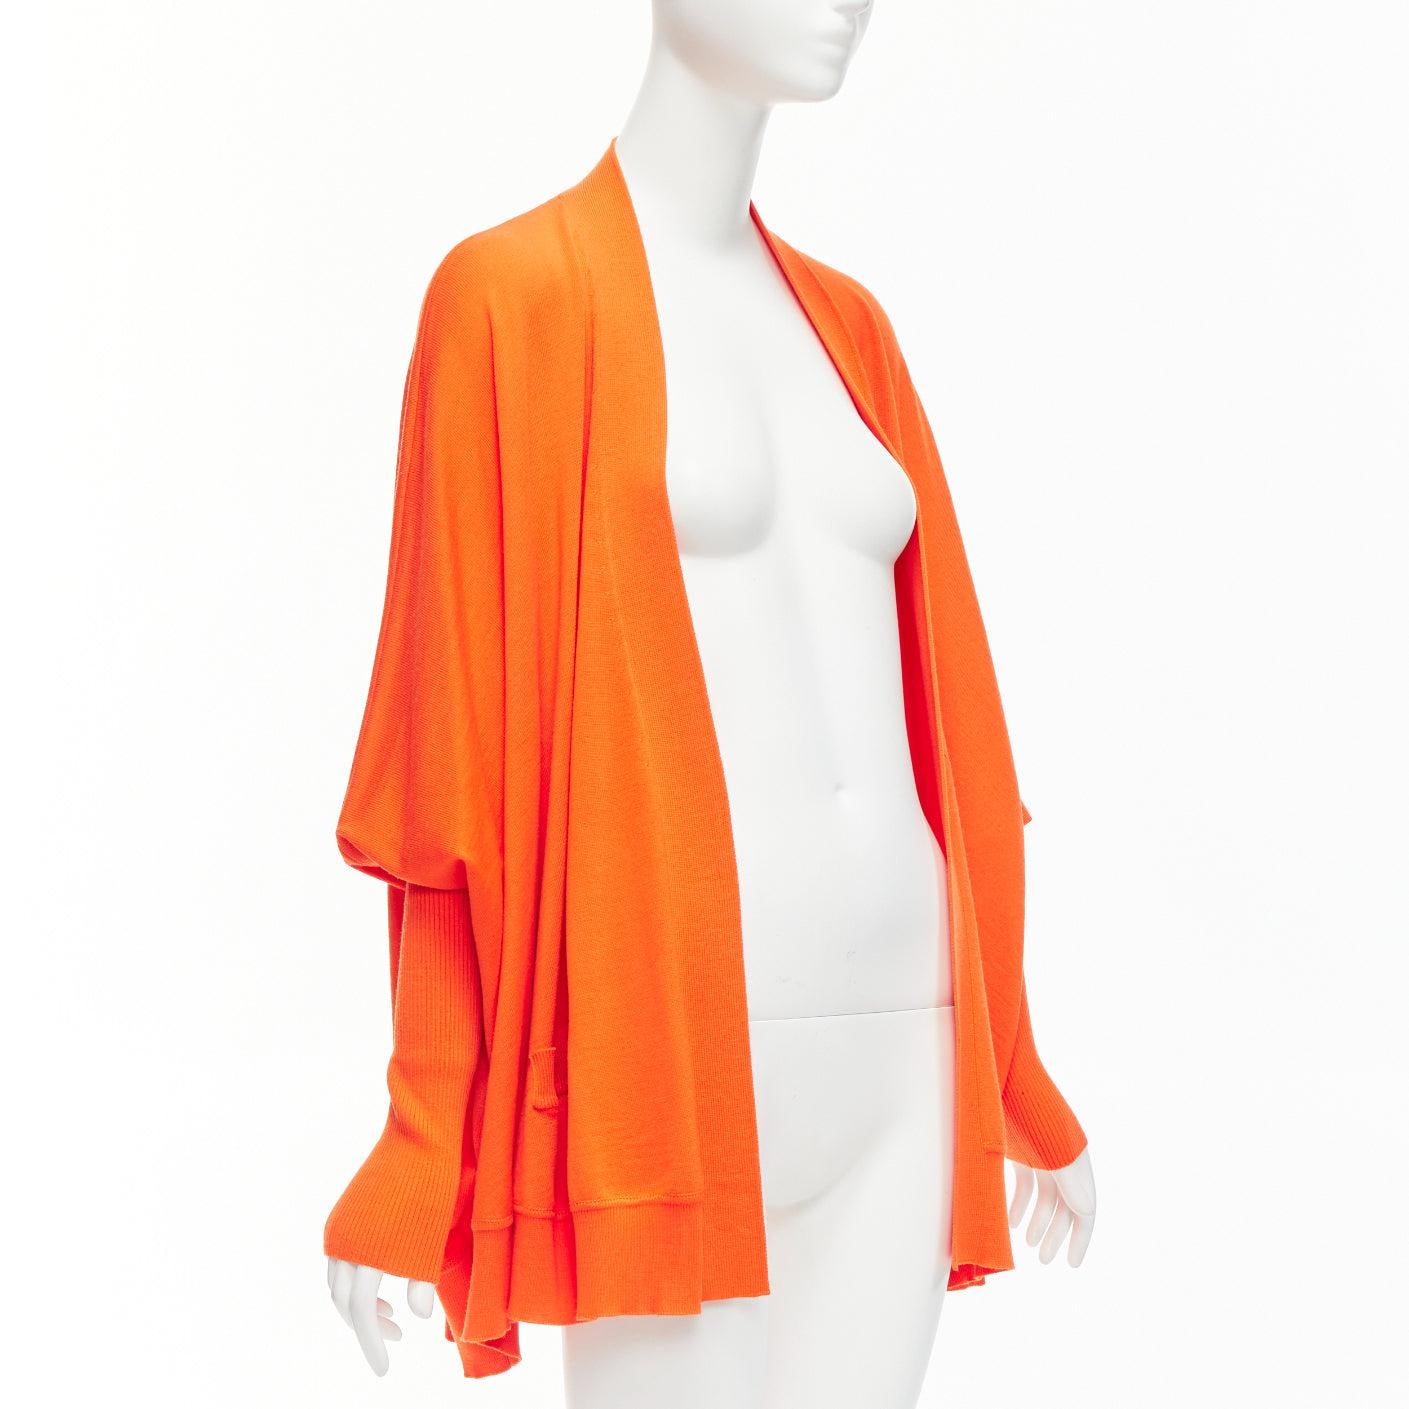 GIVENCHY 100% wool orange draped batwing ribbed sleeves relaxed cardigan M
Reference: NKLL/A00161
Brand: Givenchy
Designer: Riccardo Tisci
Material: Wool
Color: Orange
Pattern: Solid
Extra Details: Signature cross seam at back.
Made in: